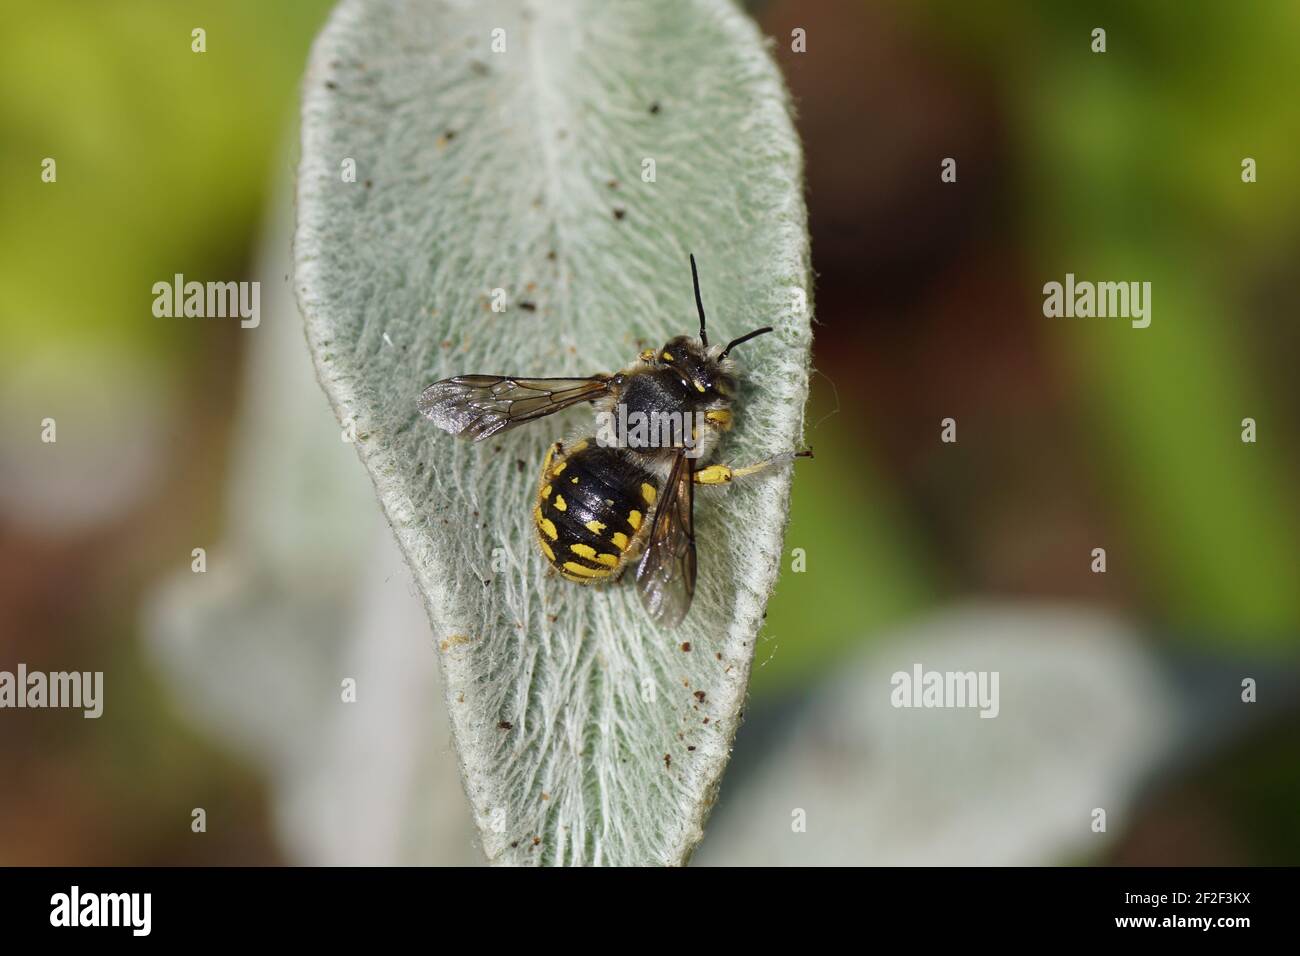 European wool carder bee (Anthidium manicatum) family Megachilidae, the leaf-cutter bees or mason bees on a hairy leaf of lamb's-ear Stock Photo